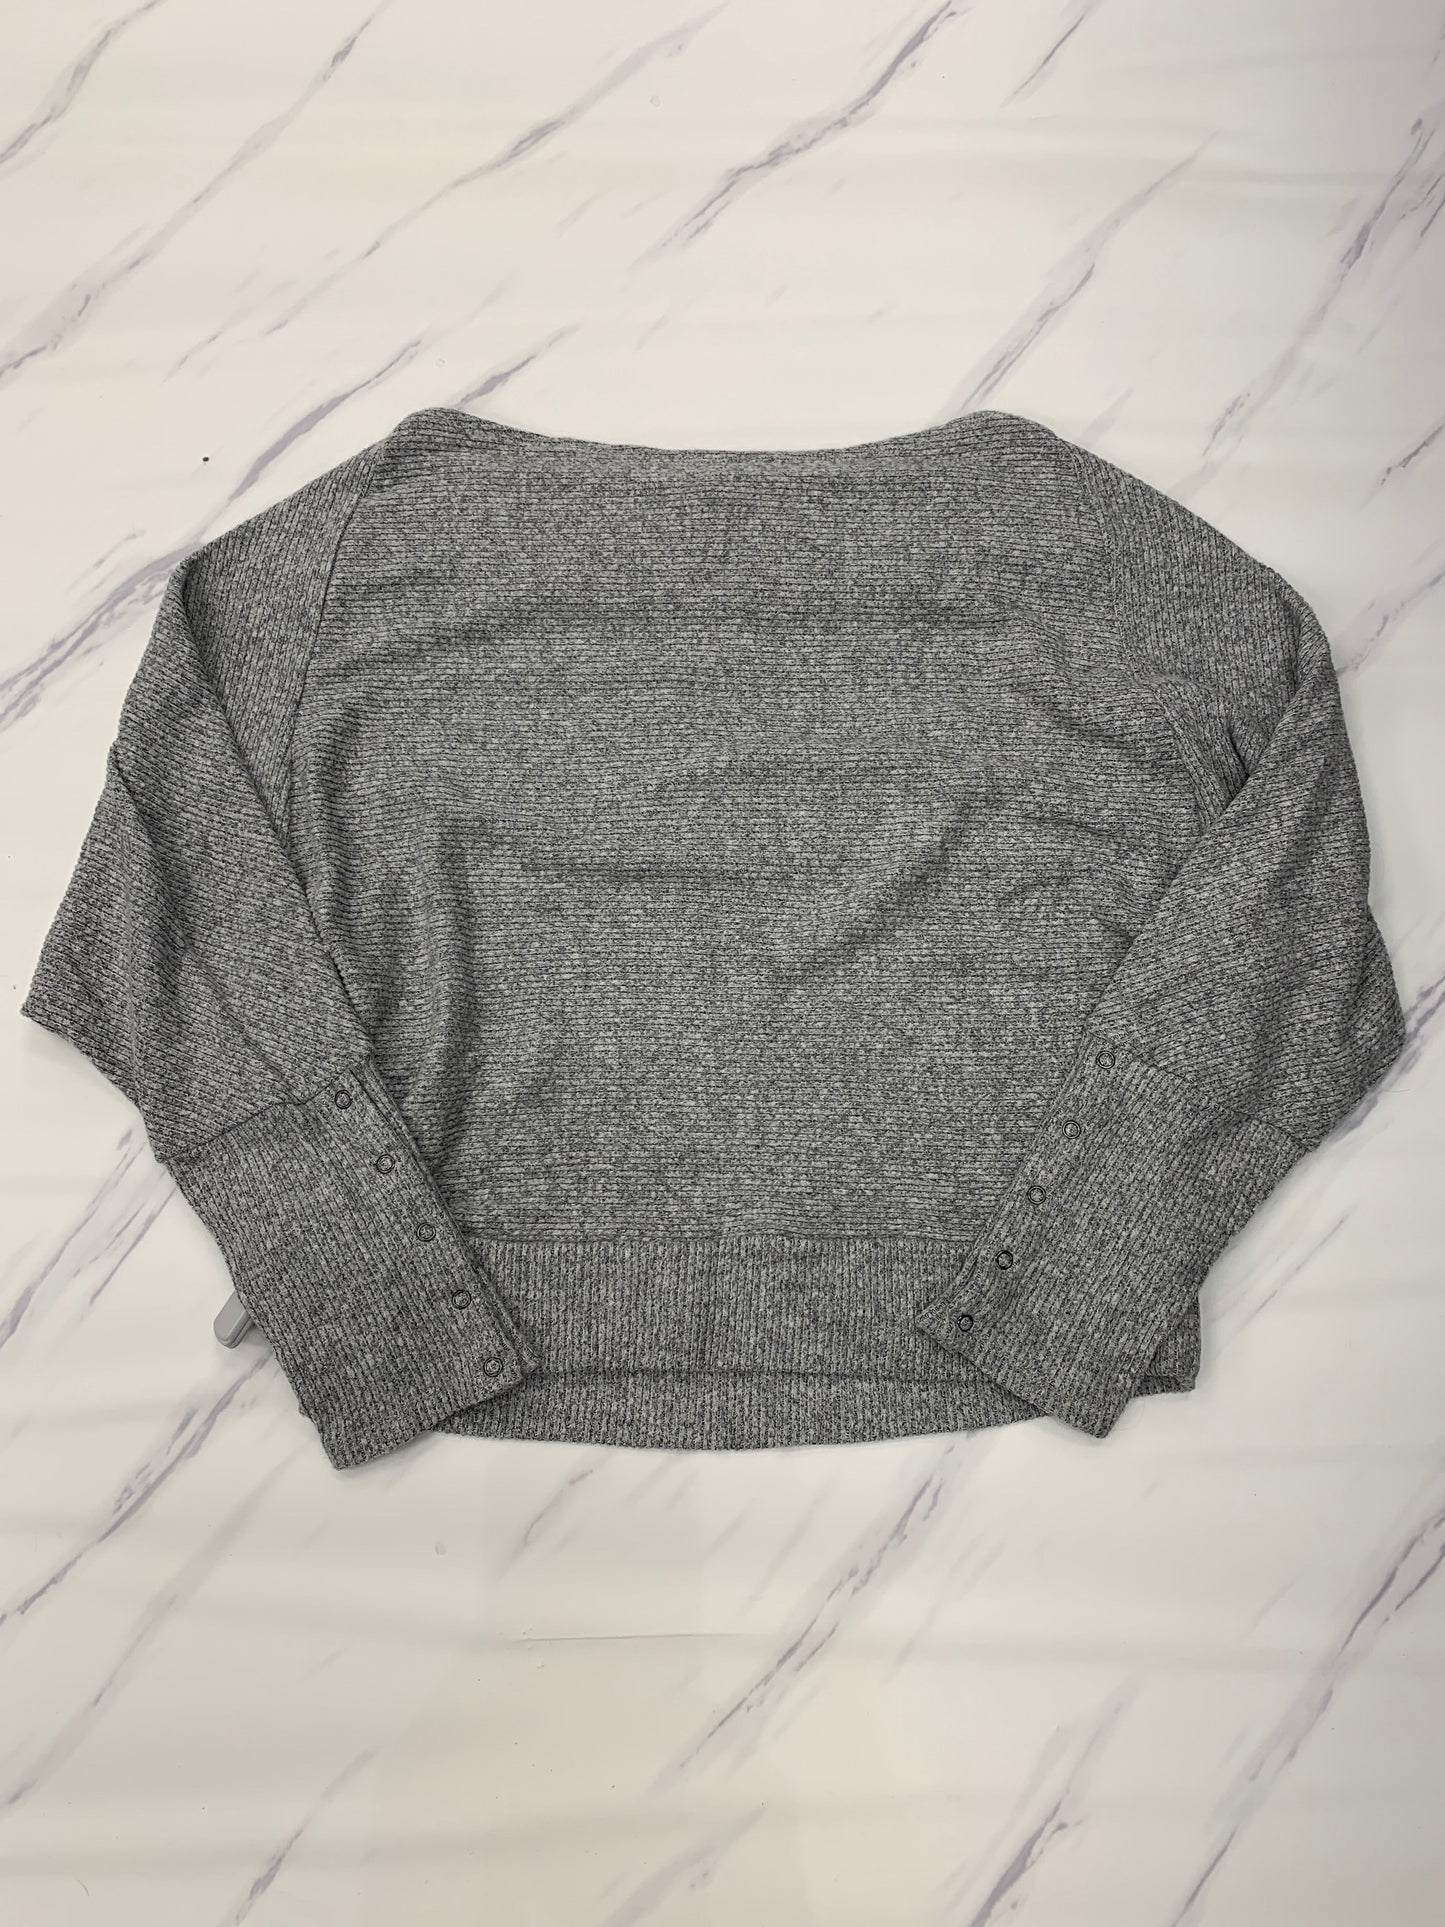 Grey Top Long Sleeve Evereve, Size L